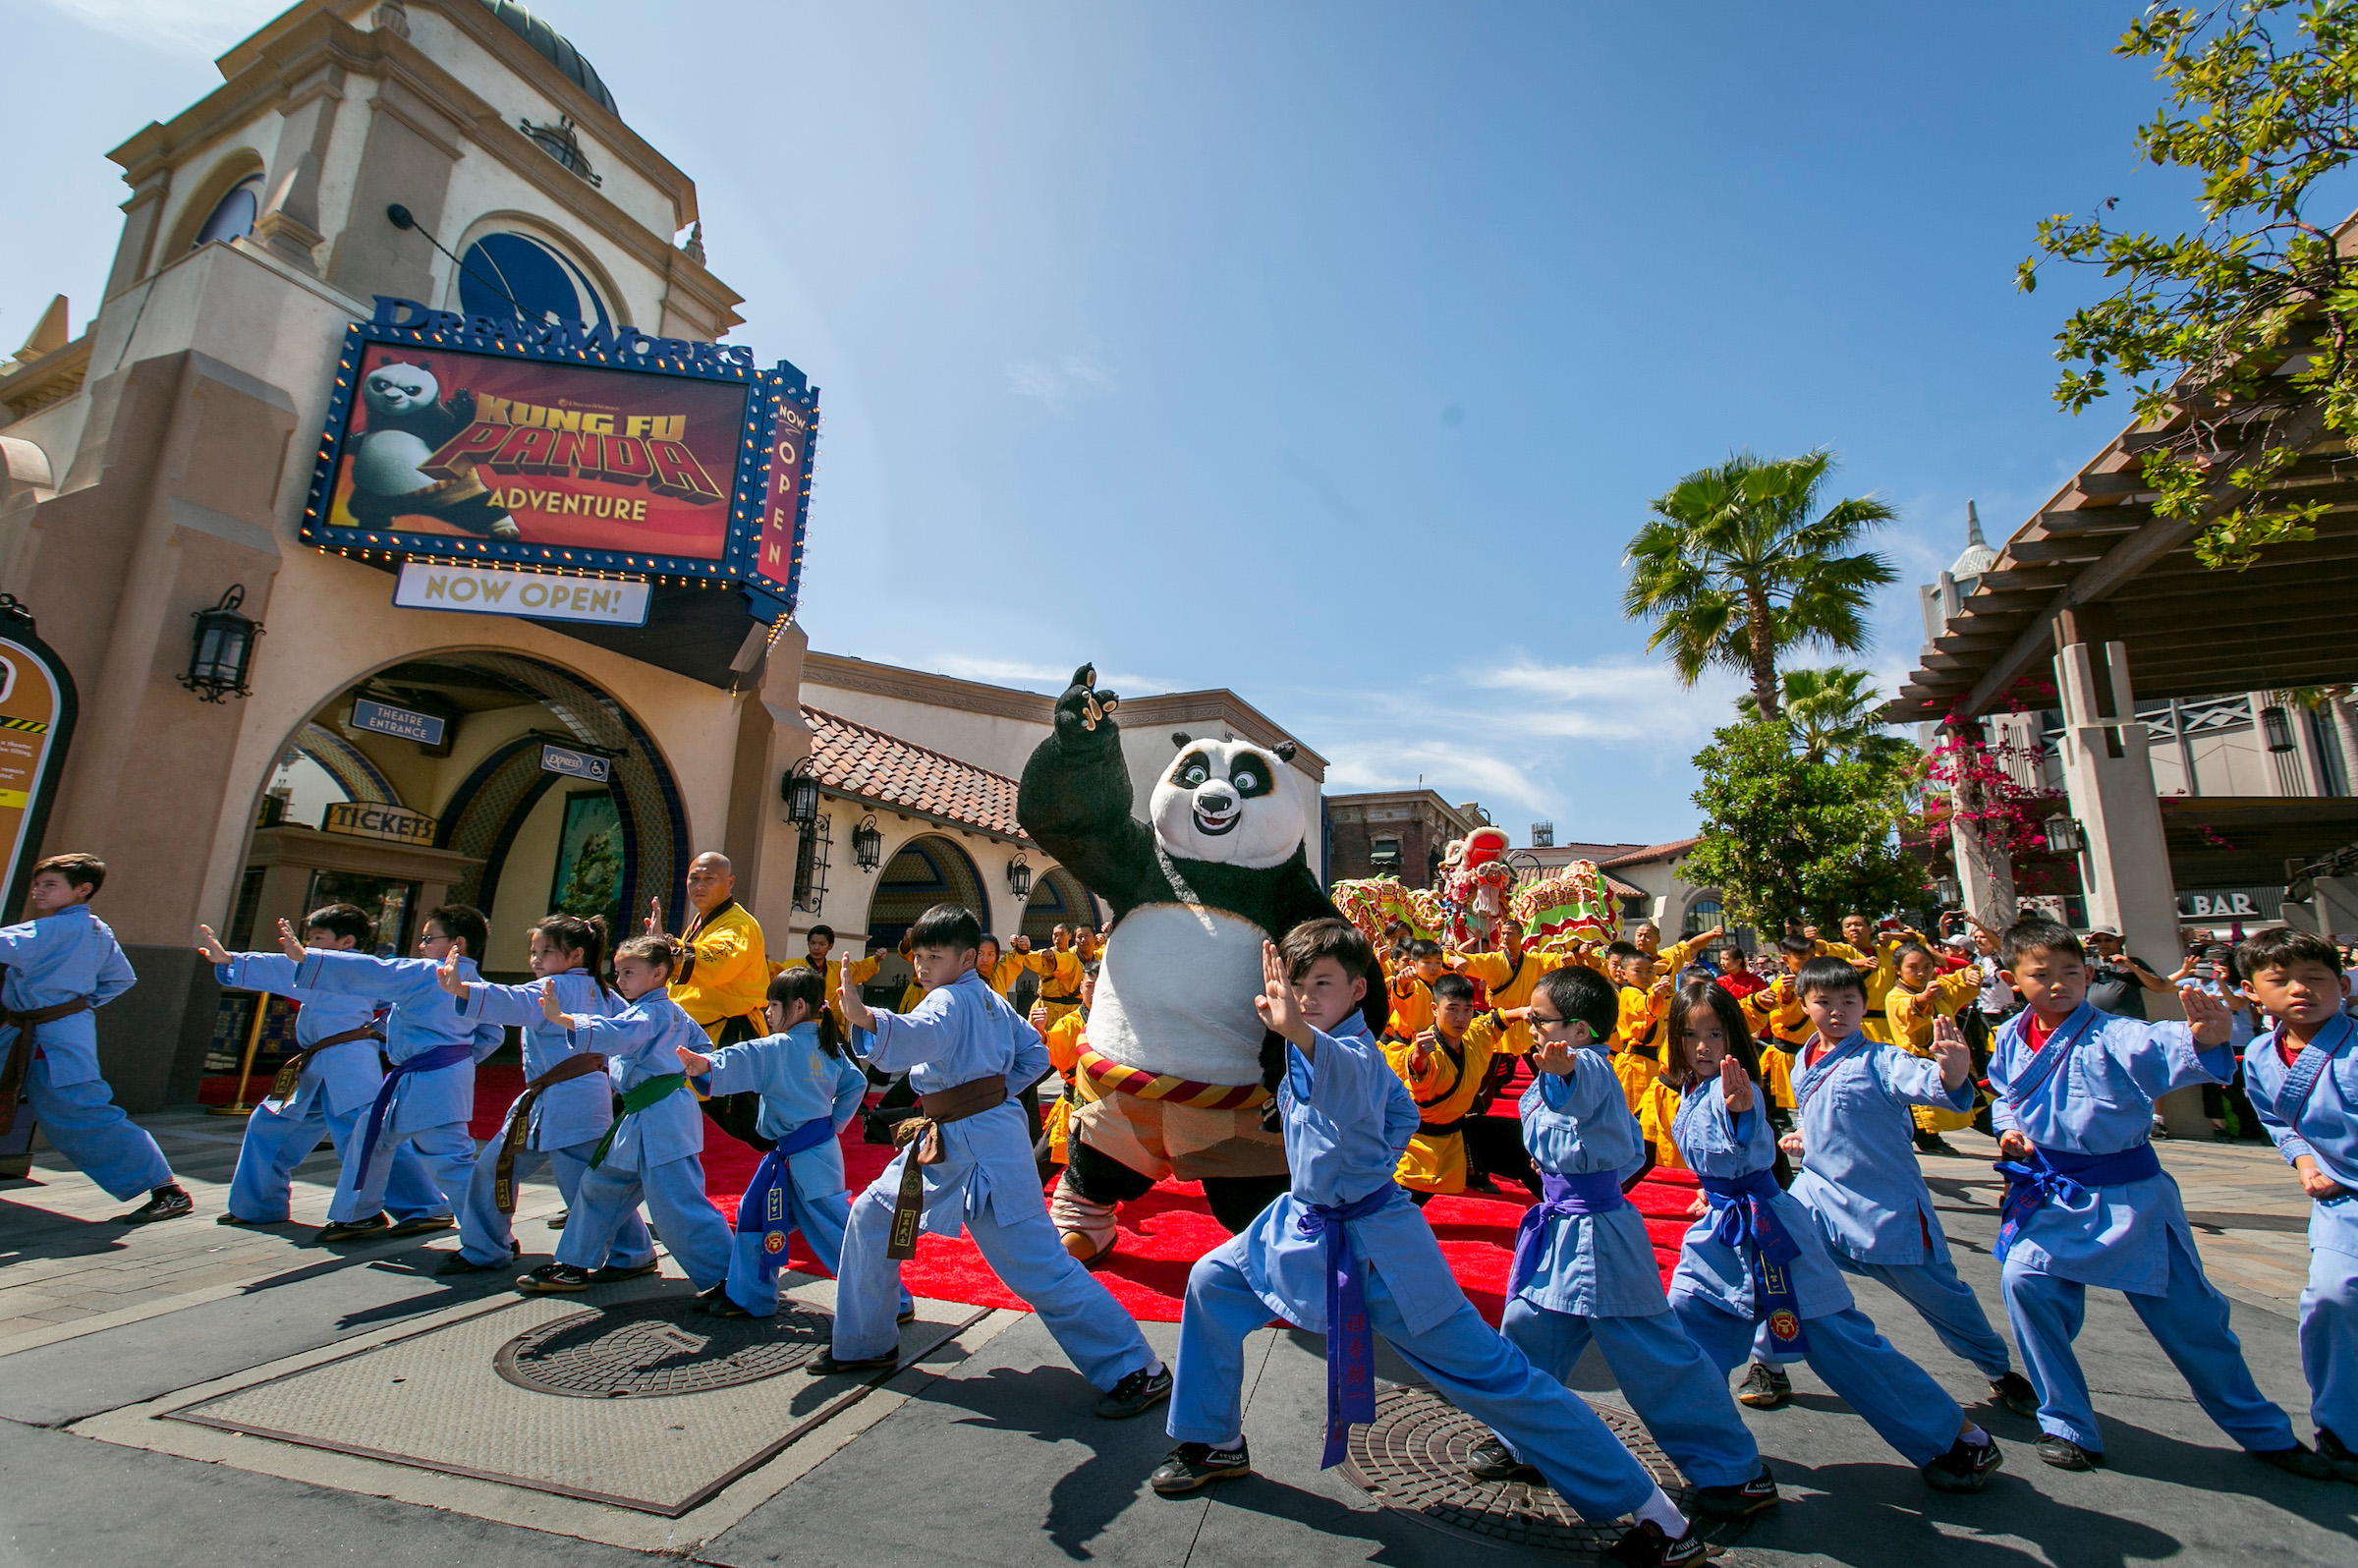 DreamWorks Theatre Featuring “Kung Fu Panda: The Emperor's Quest” Grand  Opens at Universal Studios Hollywood | Inside Universal